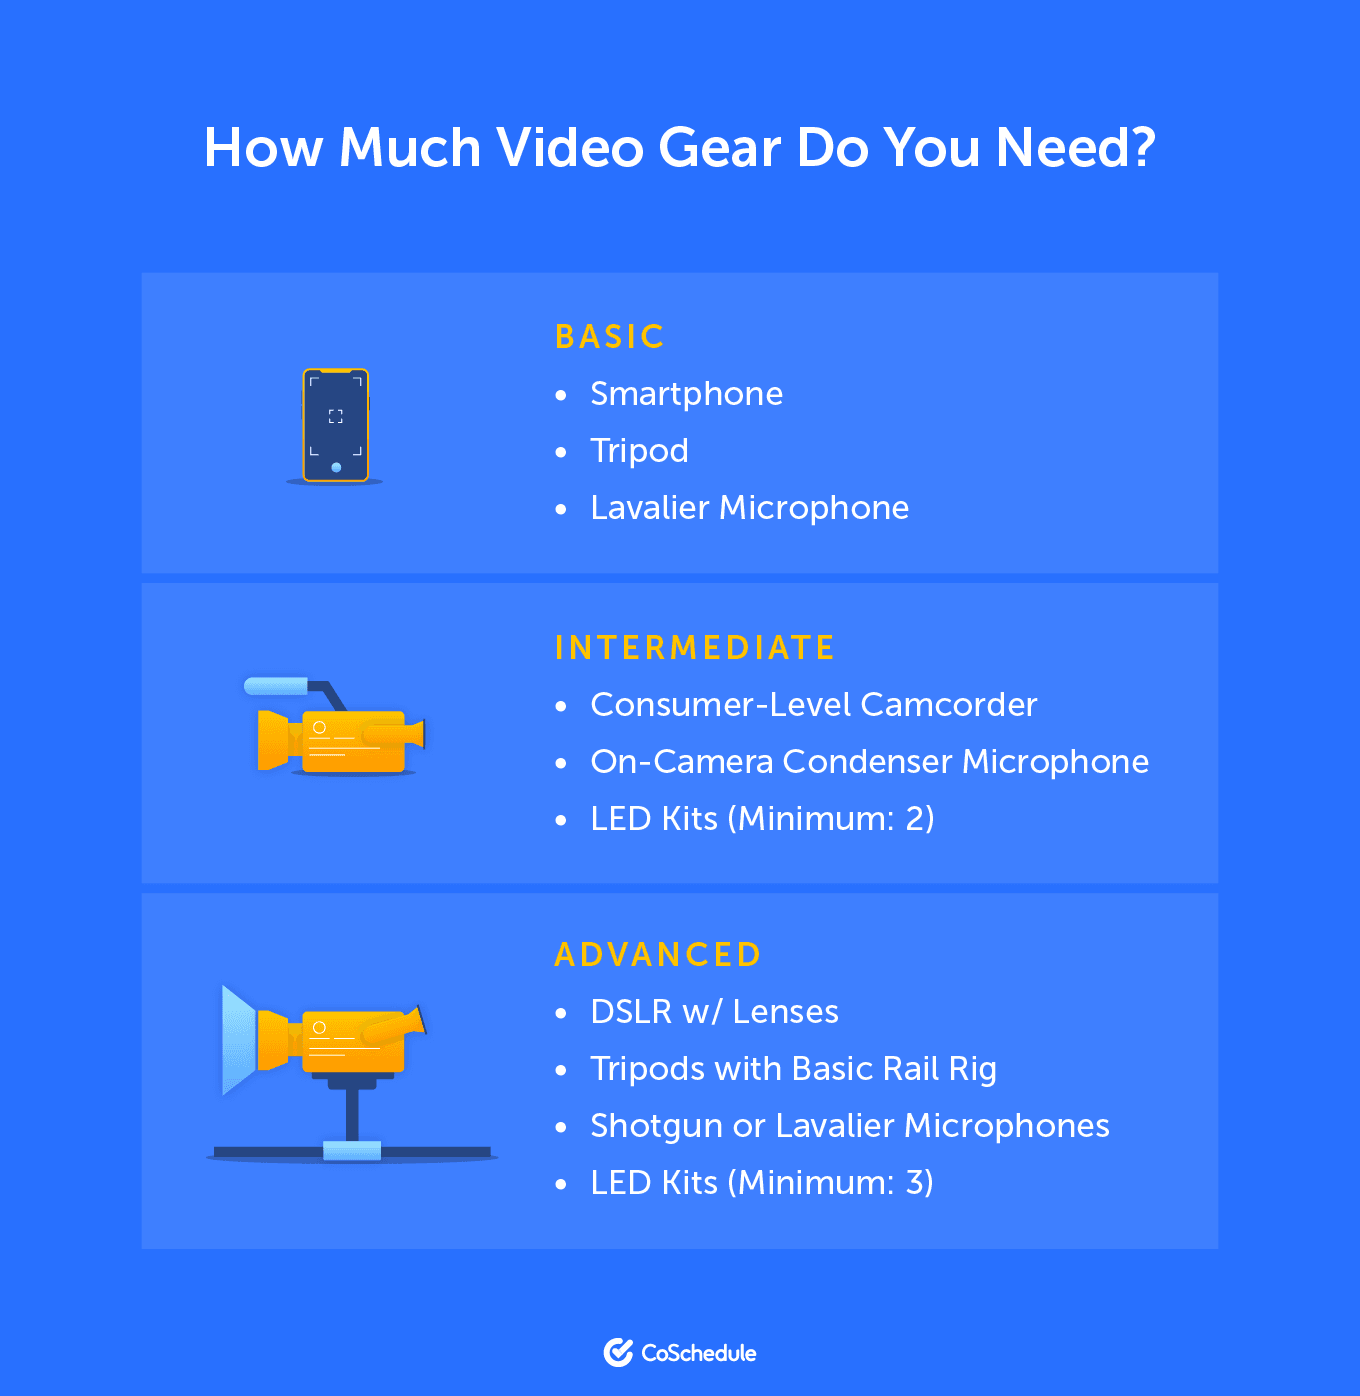 Chart showing which video gear you would need based on your circumstances